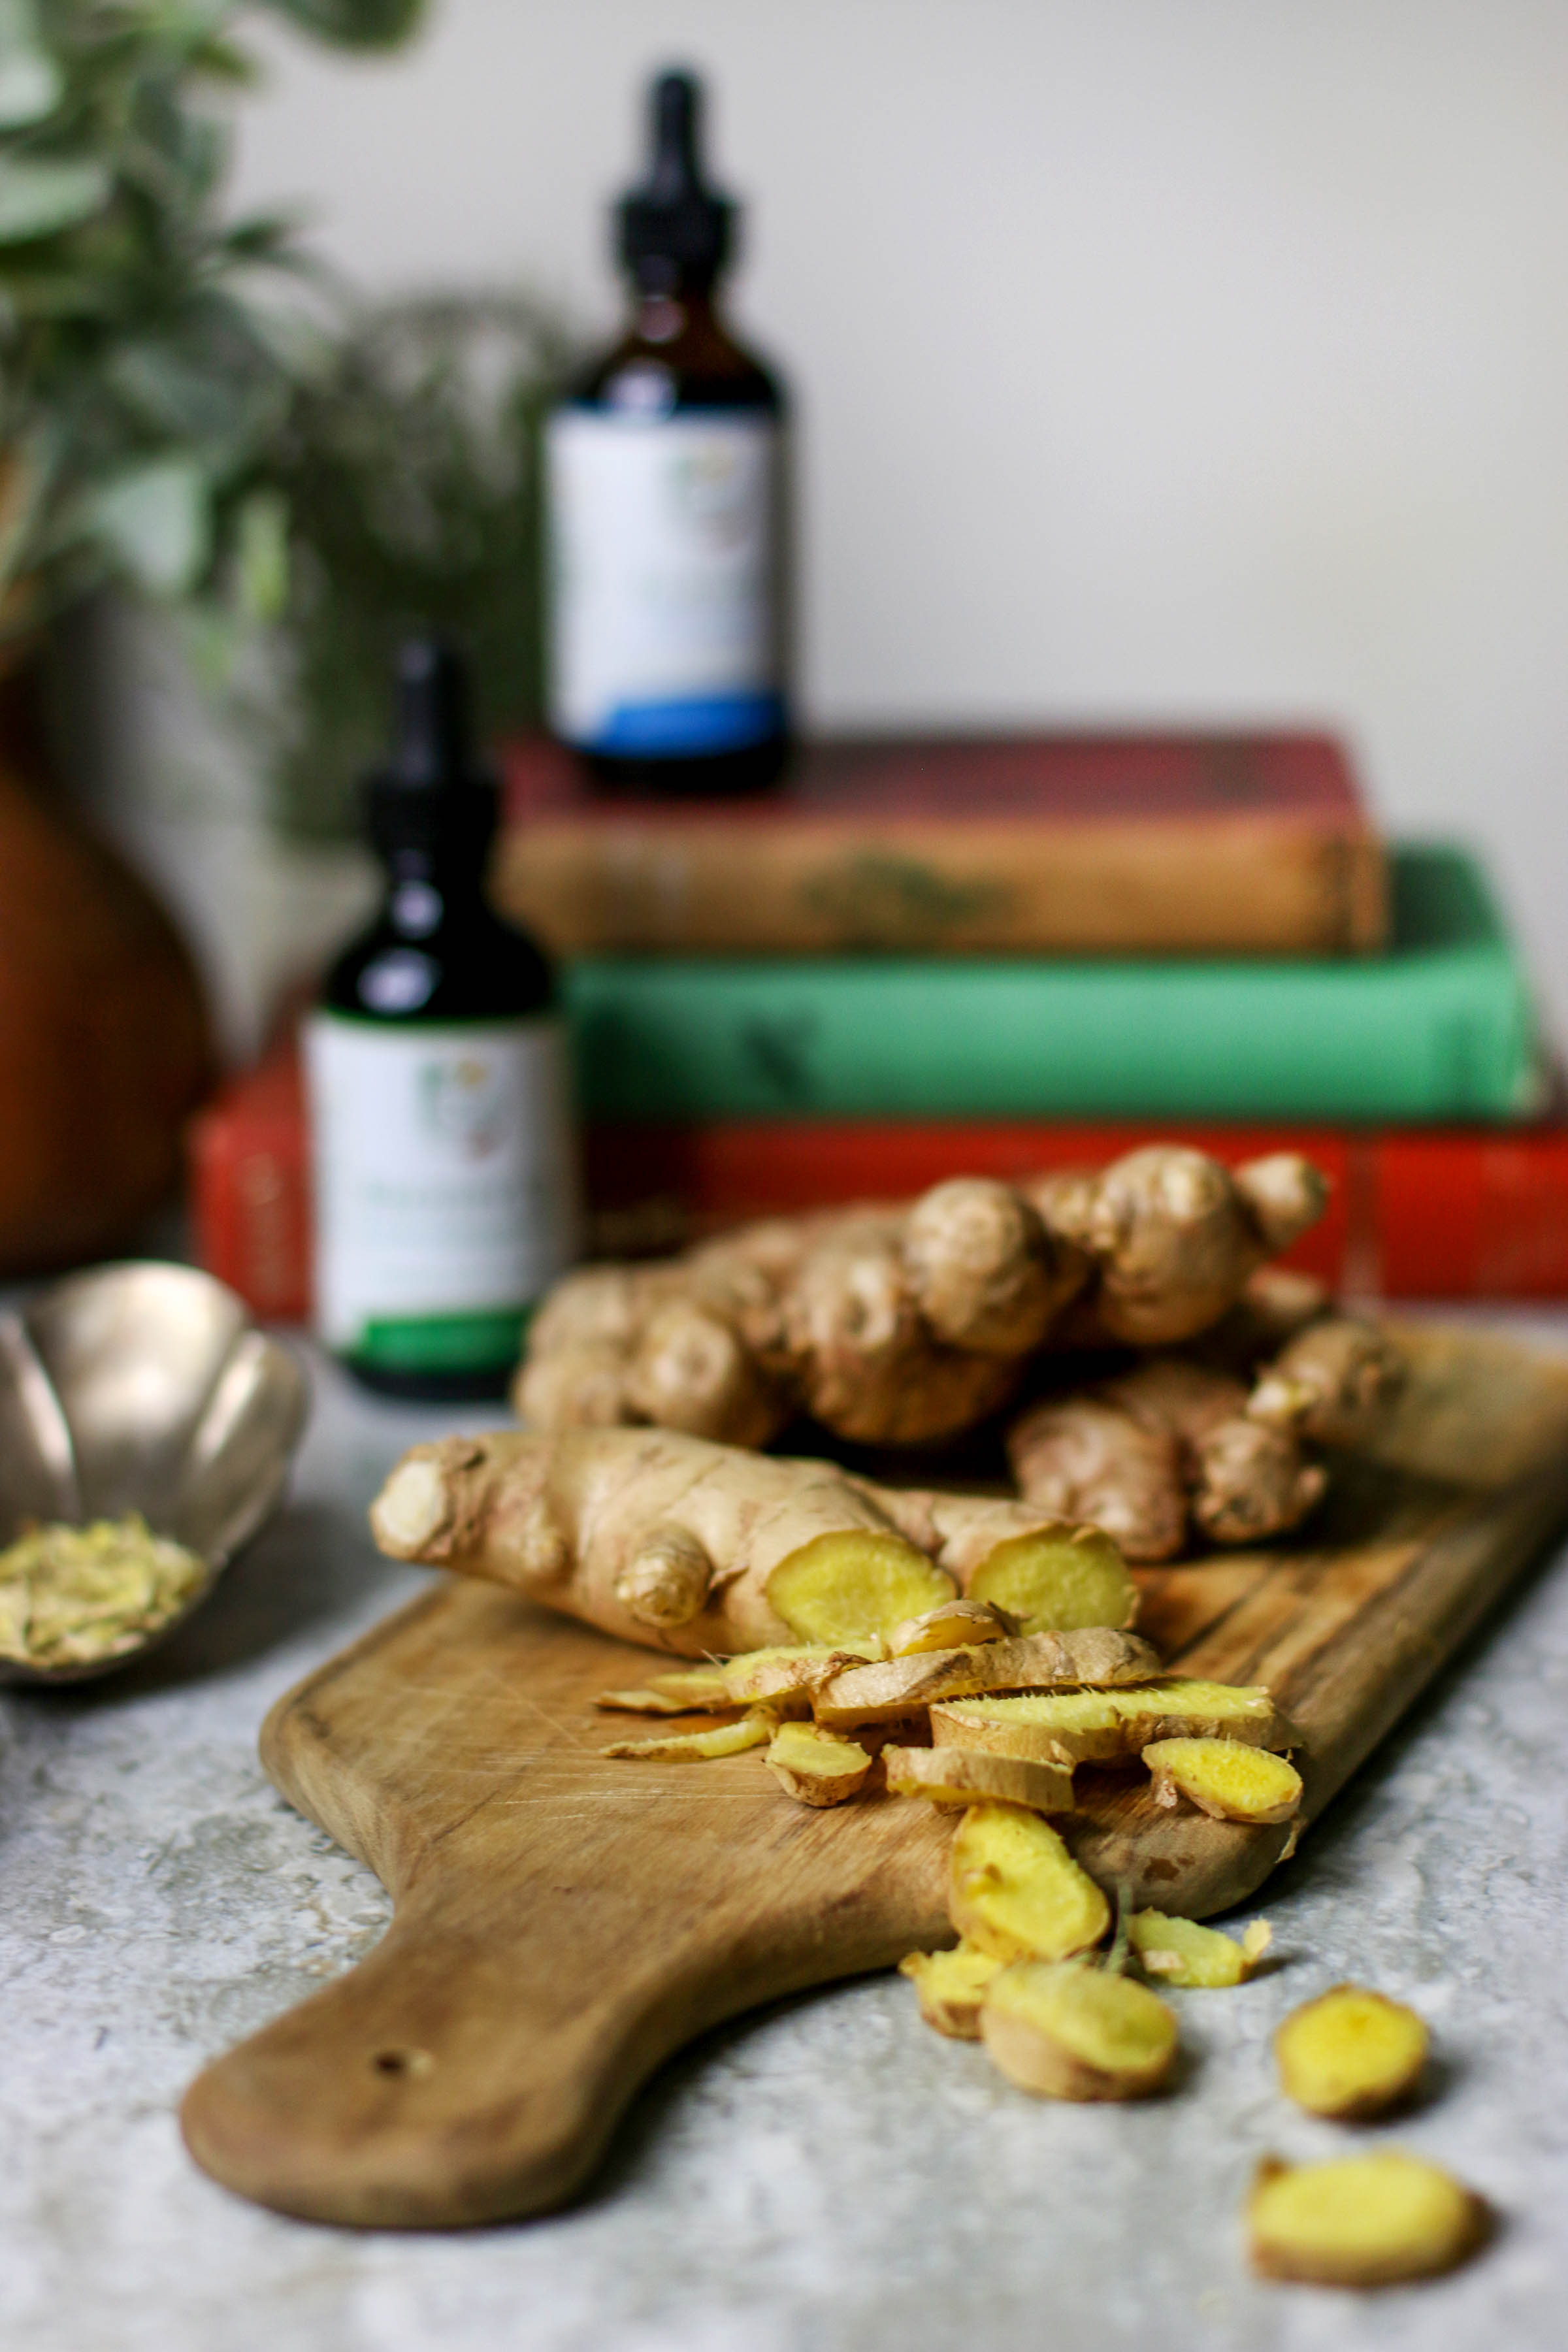 Fresh ginger root chopped into discs on wooden cutting board with books and tincture in background.